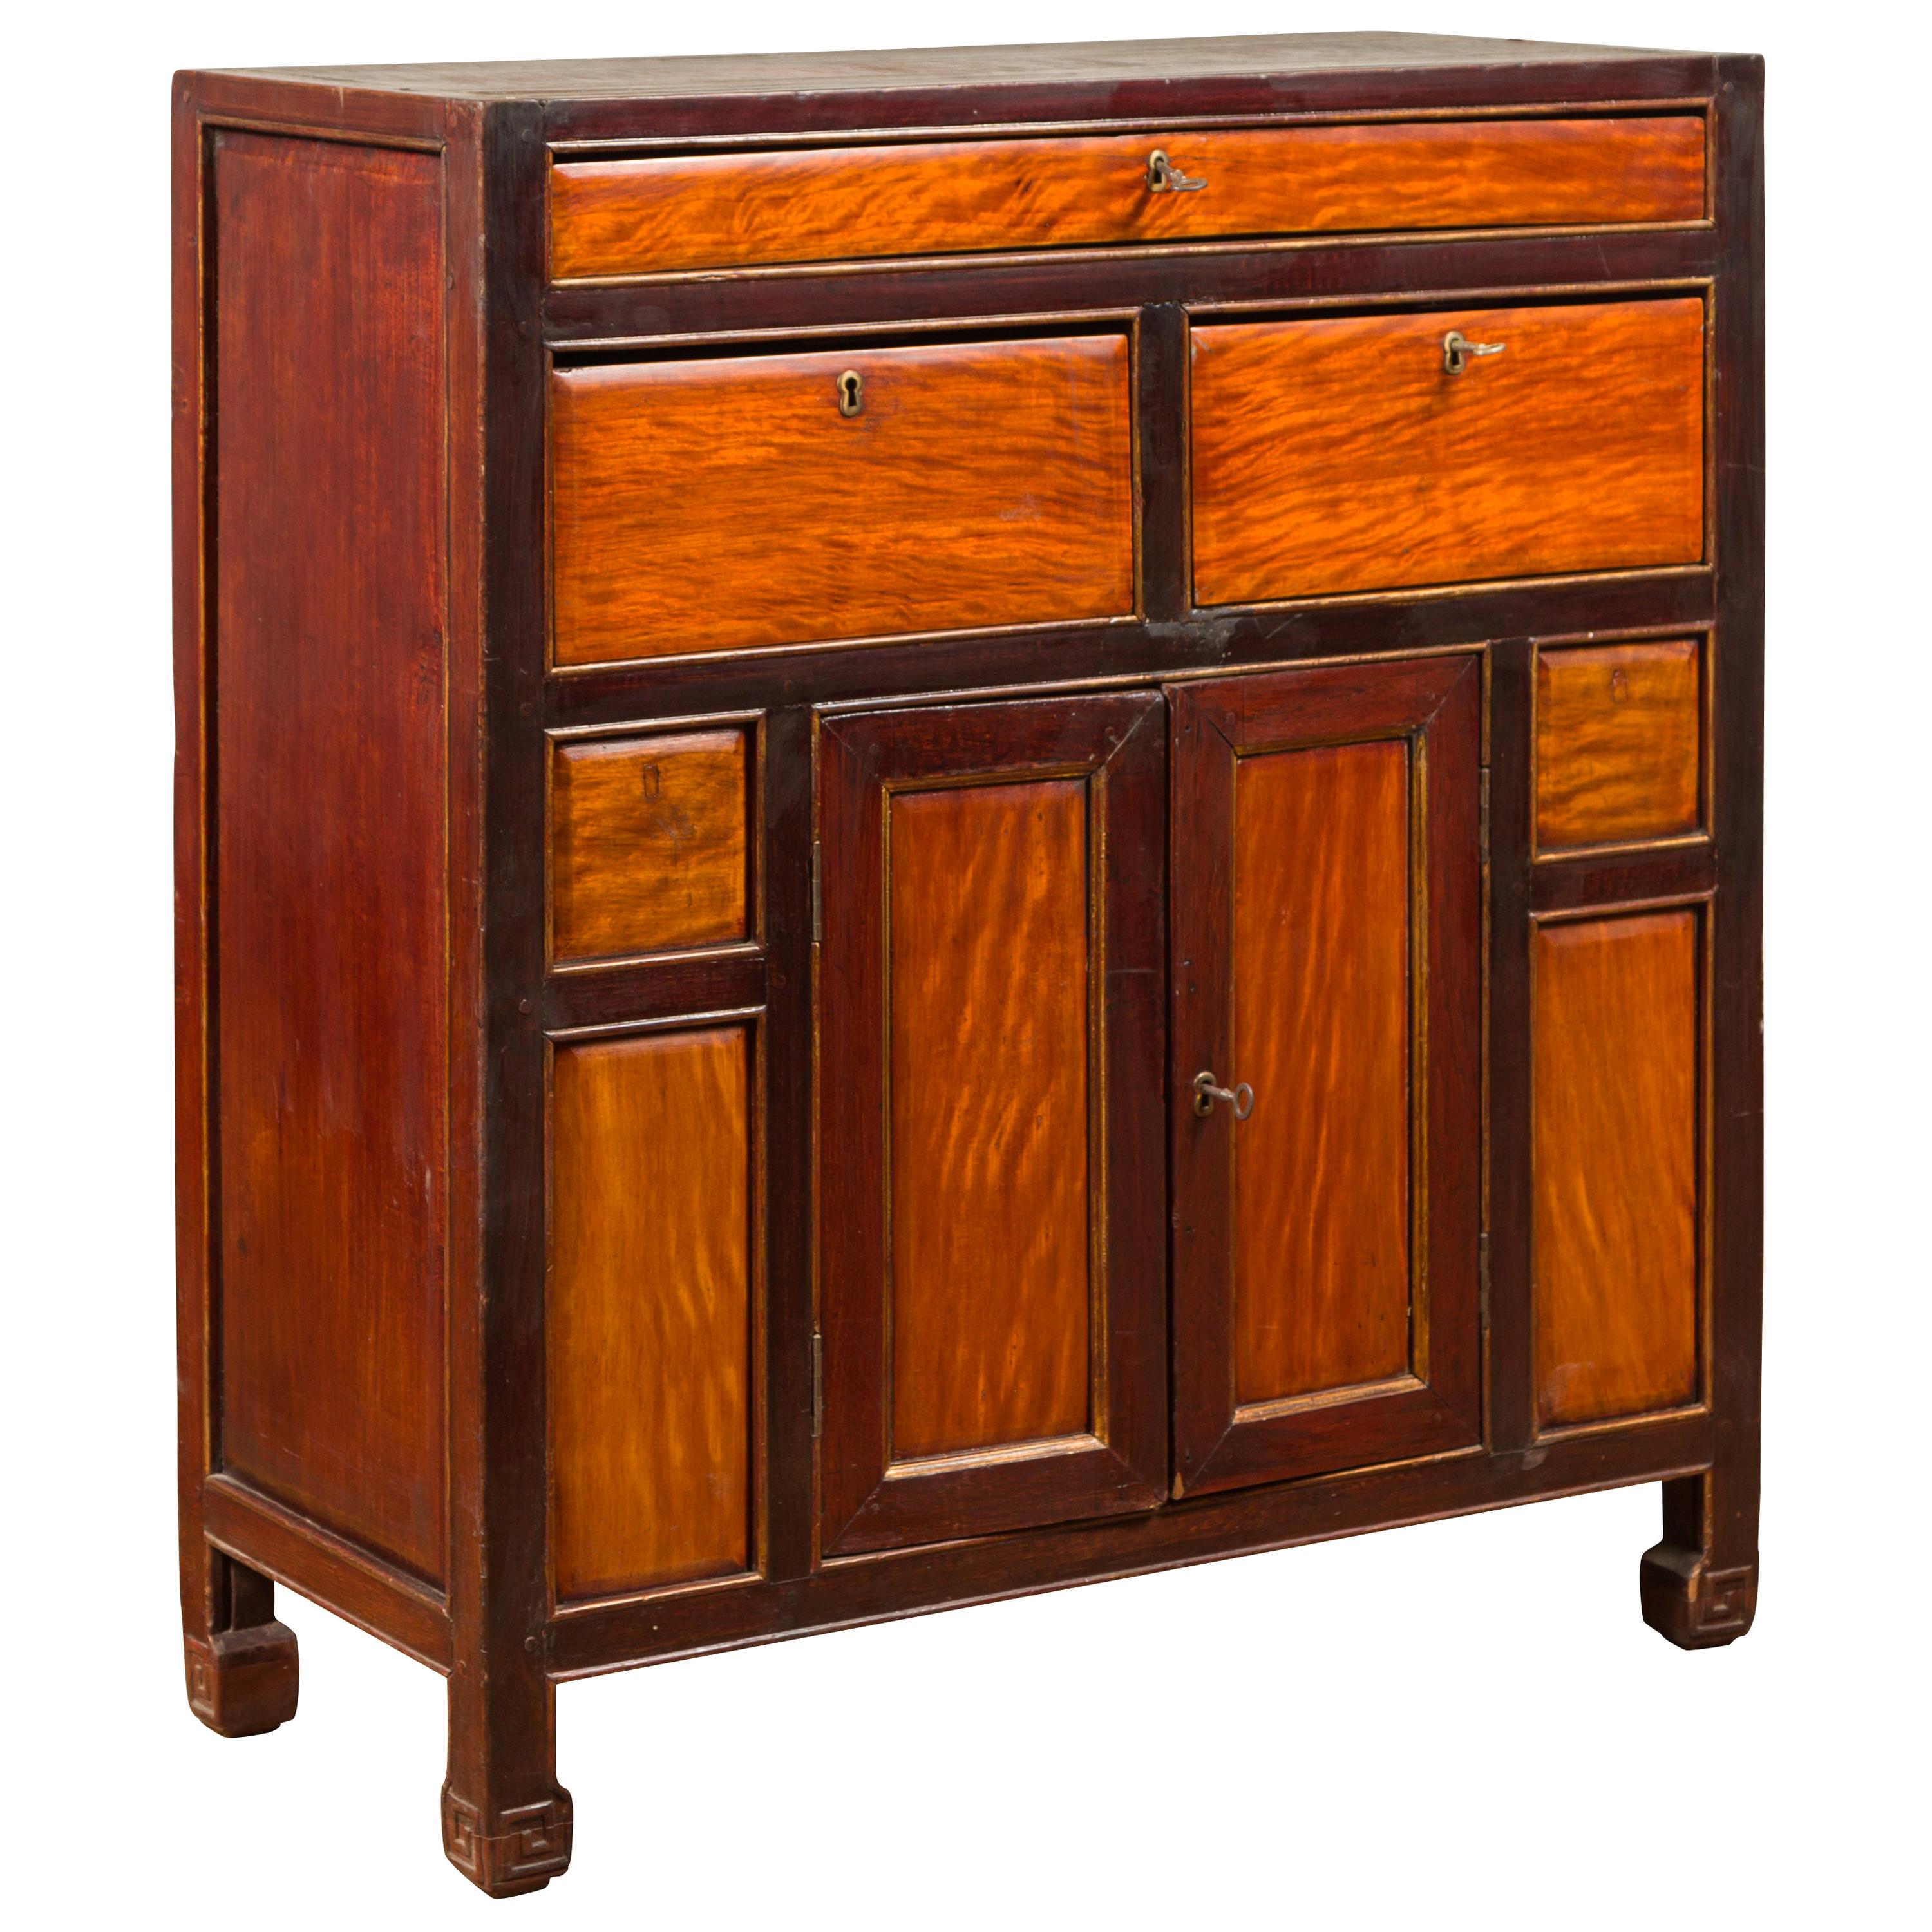 Chinese Vintage Two-Toned Side Chest with Drawers, Doors and Scrolled Feet